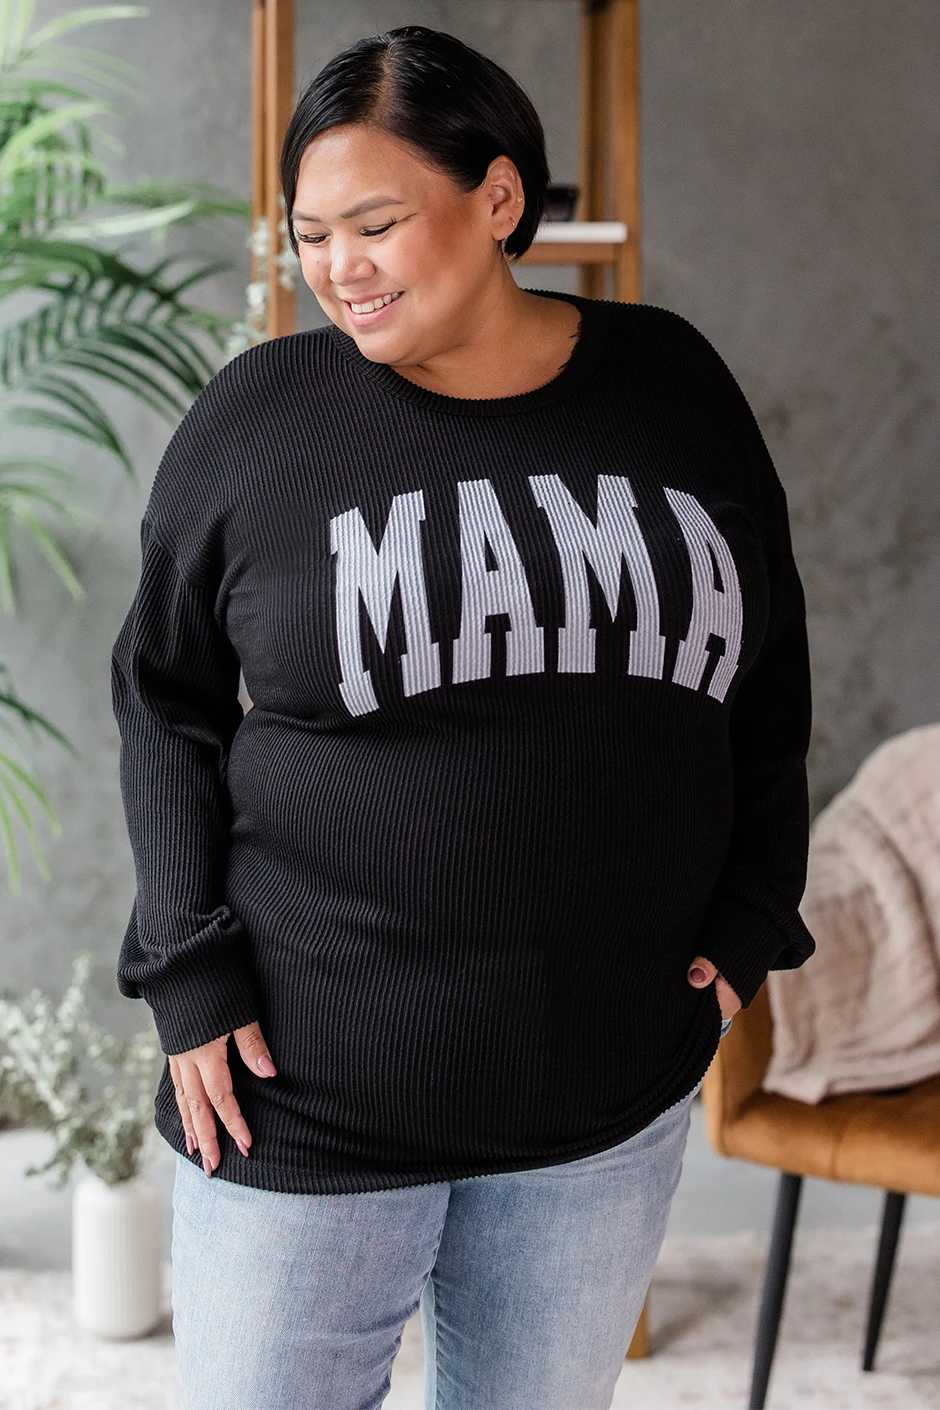 Triple D Cropped Shirt – mamaoutfitters